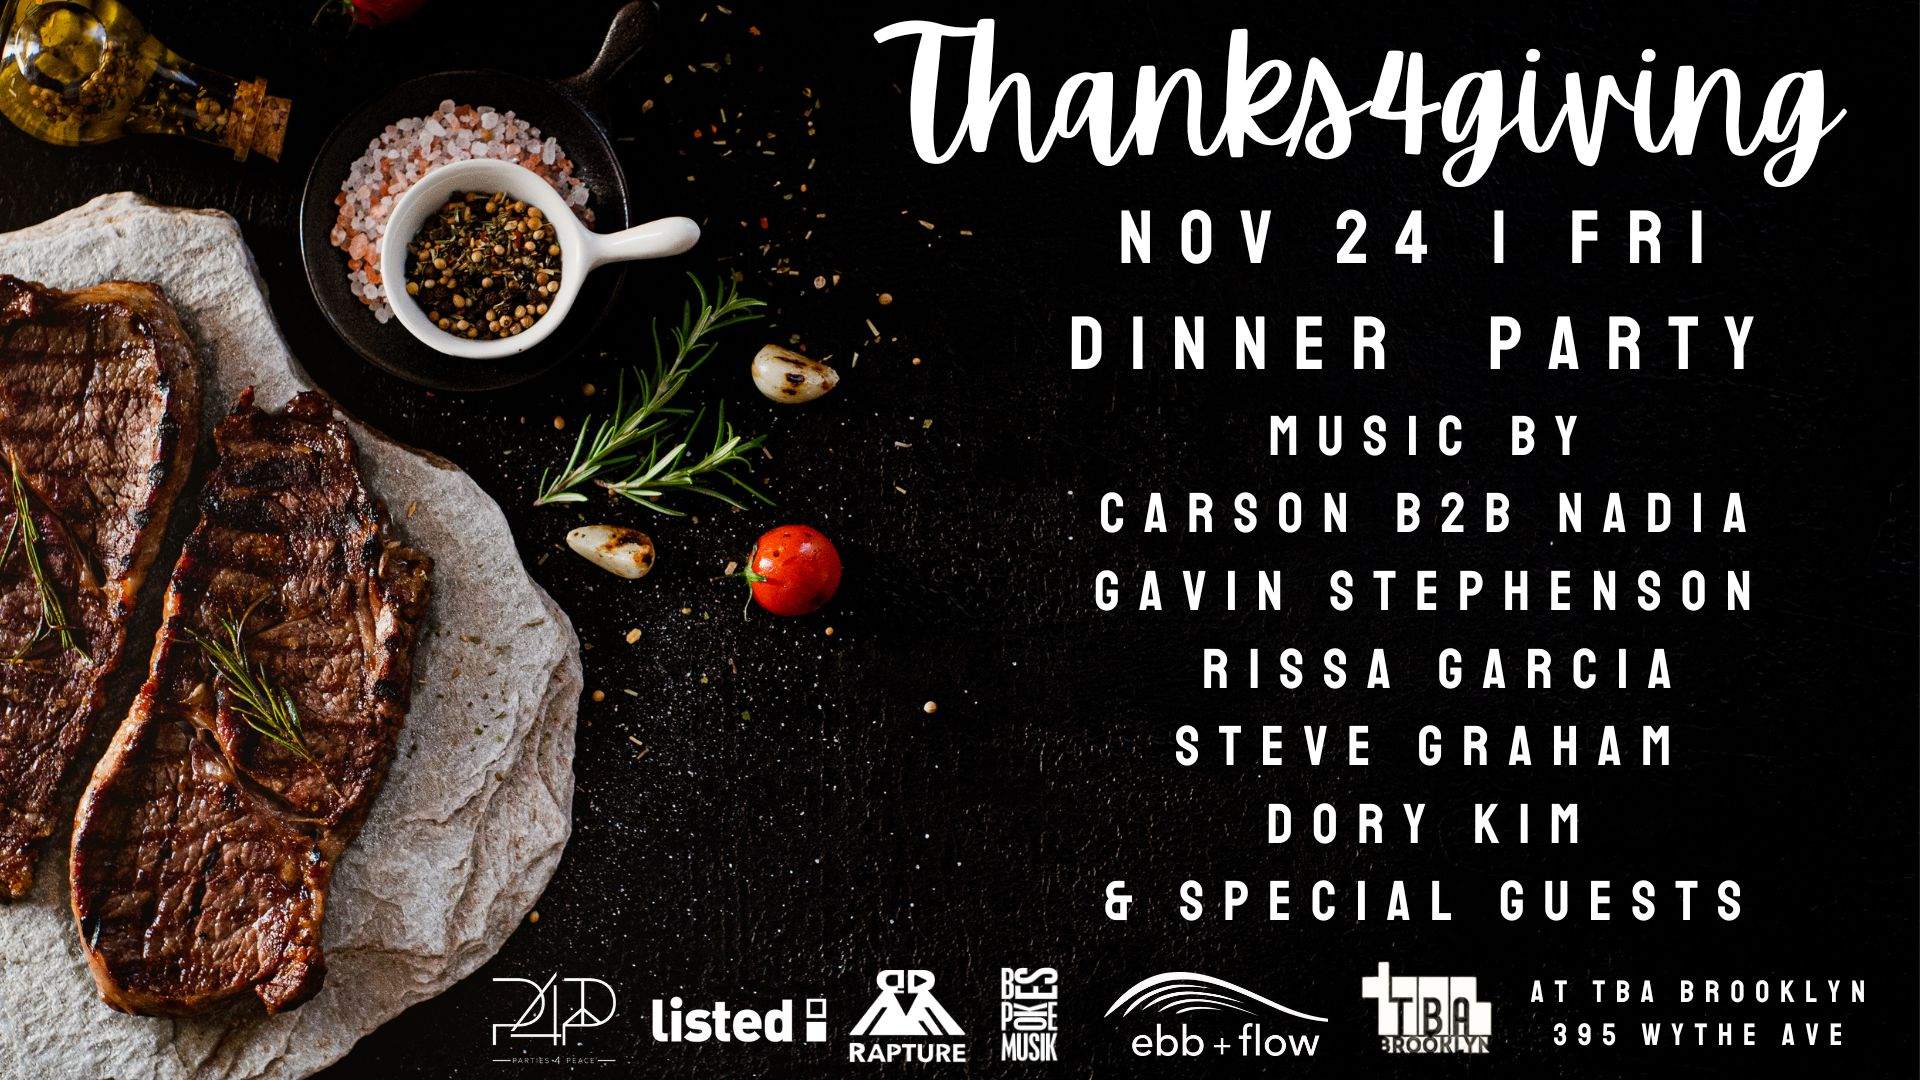 Thanks-4-Giving Dinner Party + Late Night Event - Página frontal